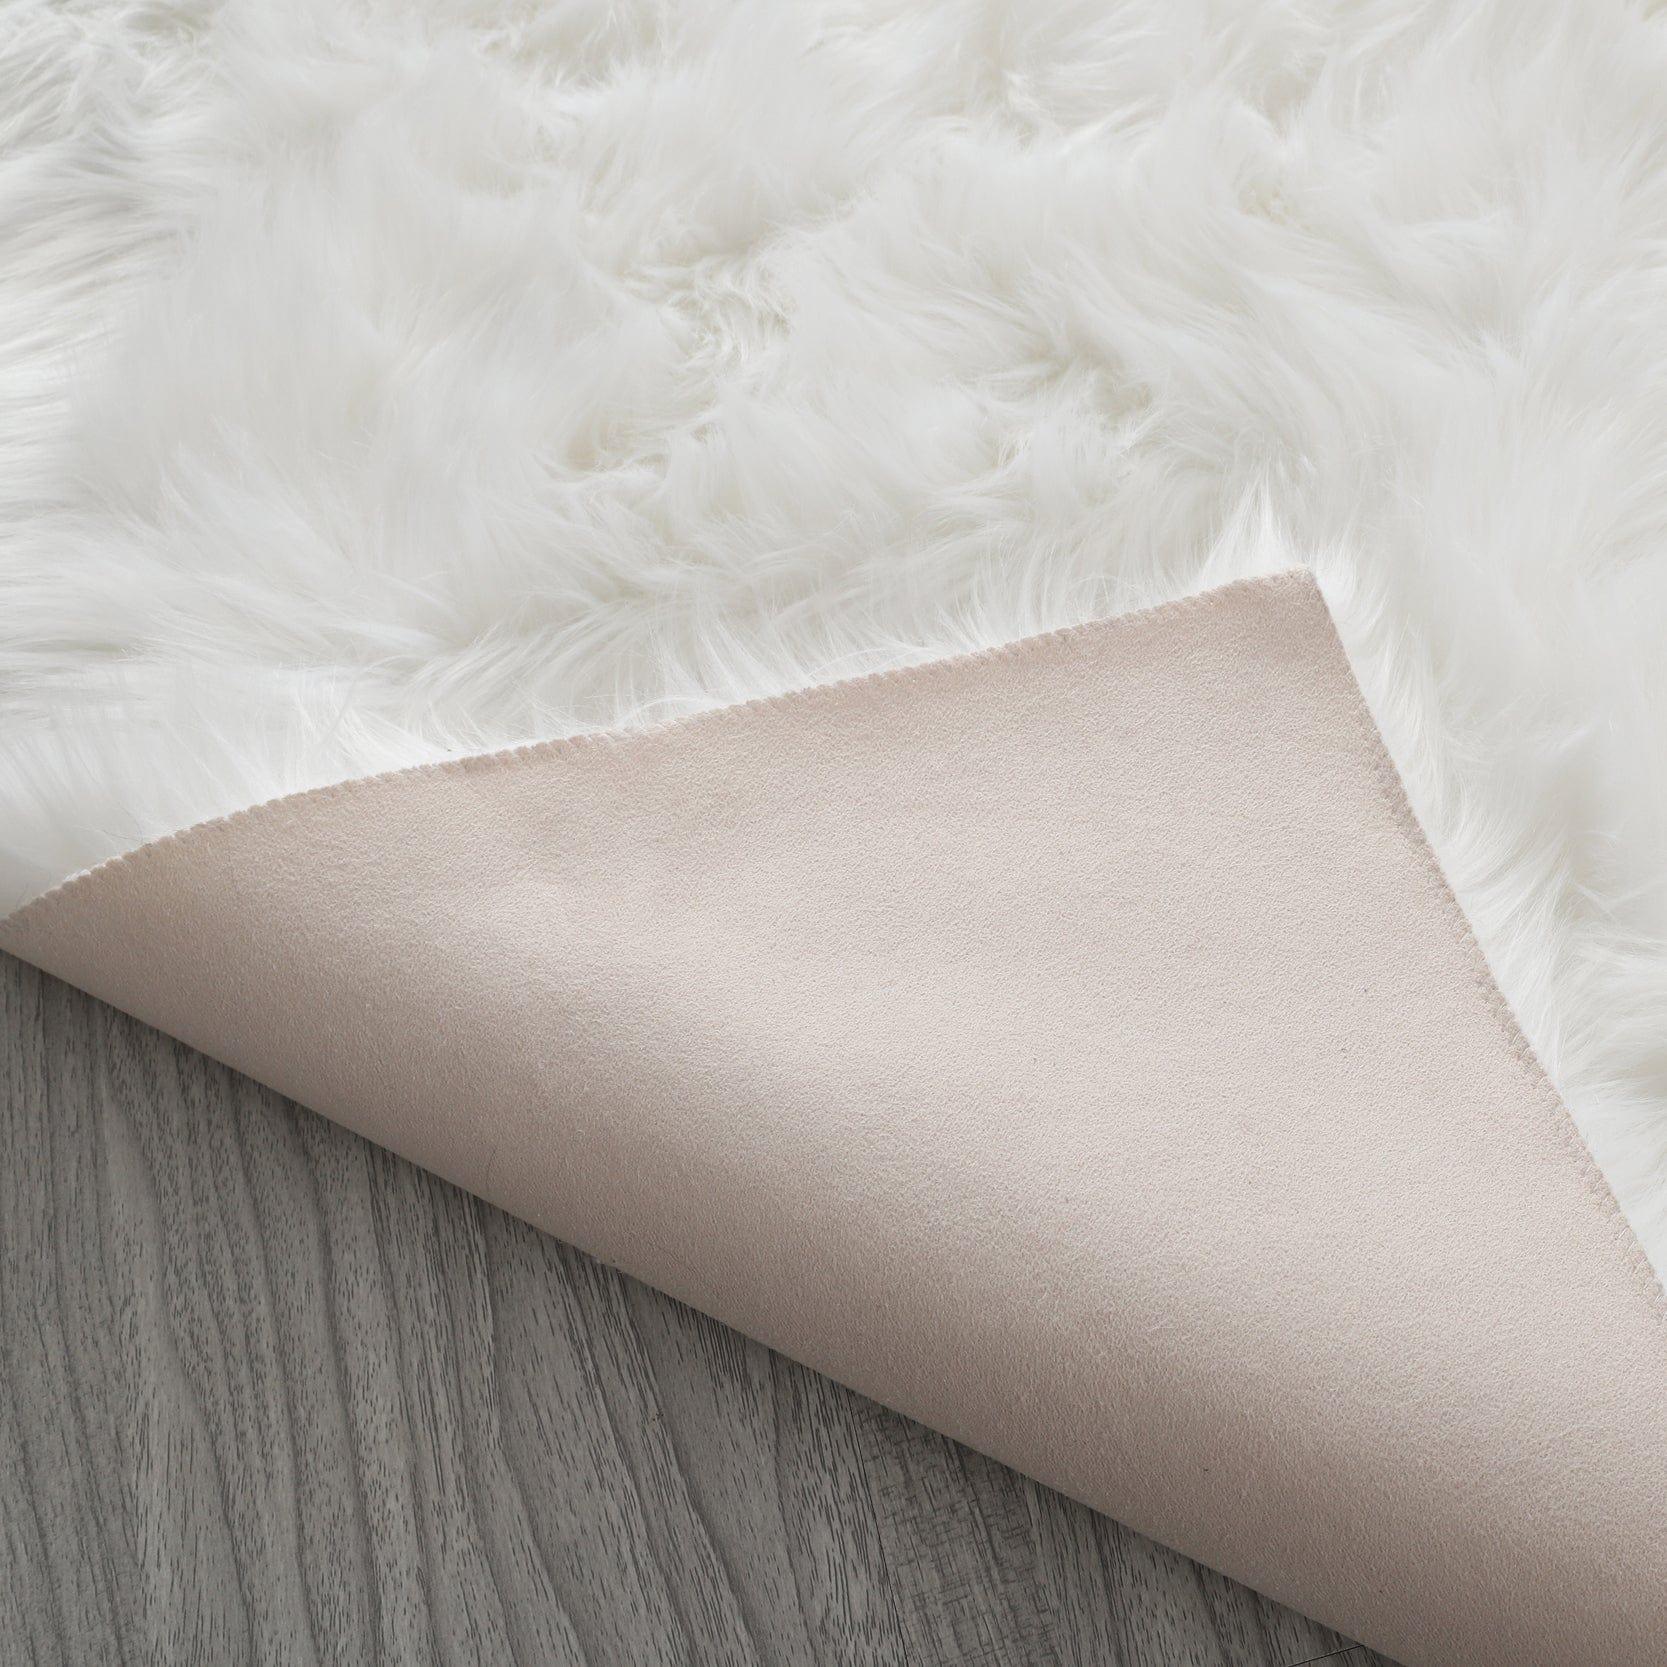 Shop "Cozy Collection" Ultra Soft Fluffy Faux Fur Sheepskin Area Rug Mademoiselle Home Decor